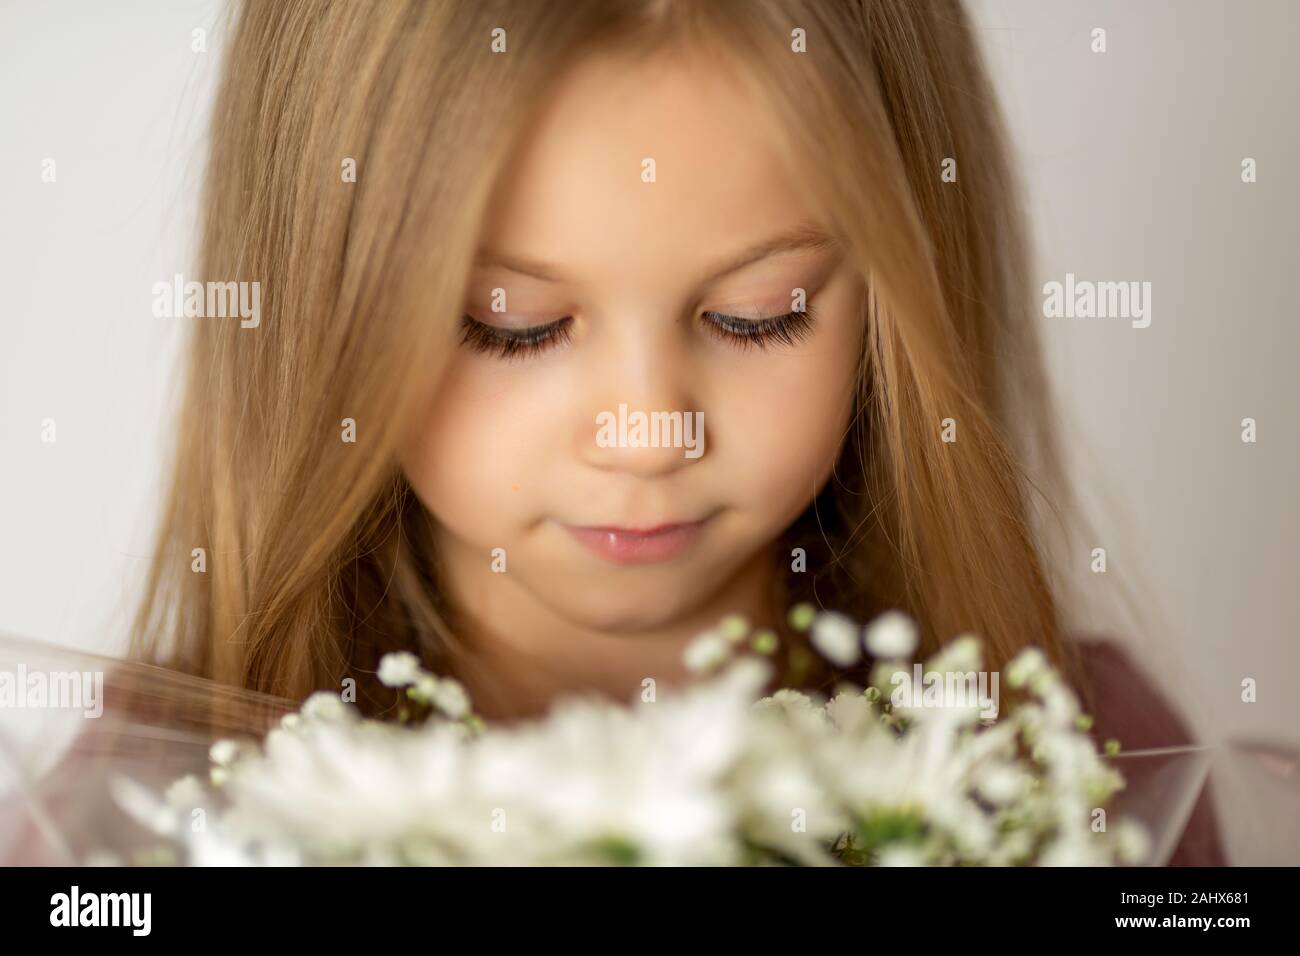 close-up portrait of a blonde little girl with downcast eyes holding a bouquet of white wildflowers Stock Photo